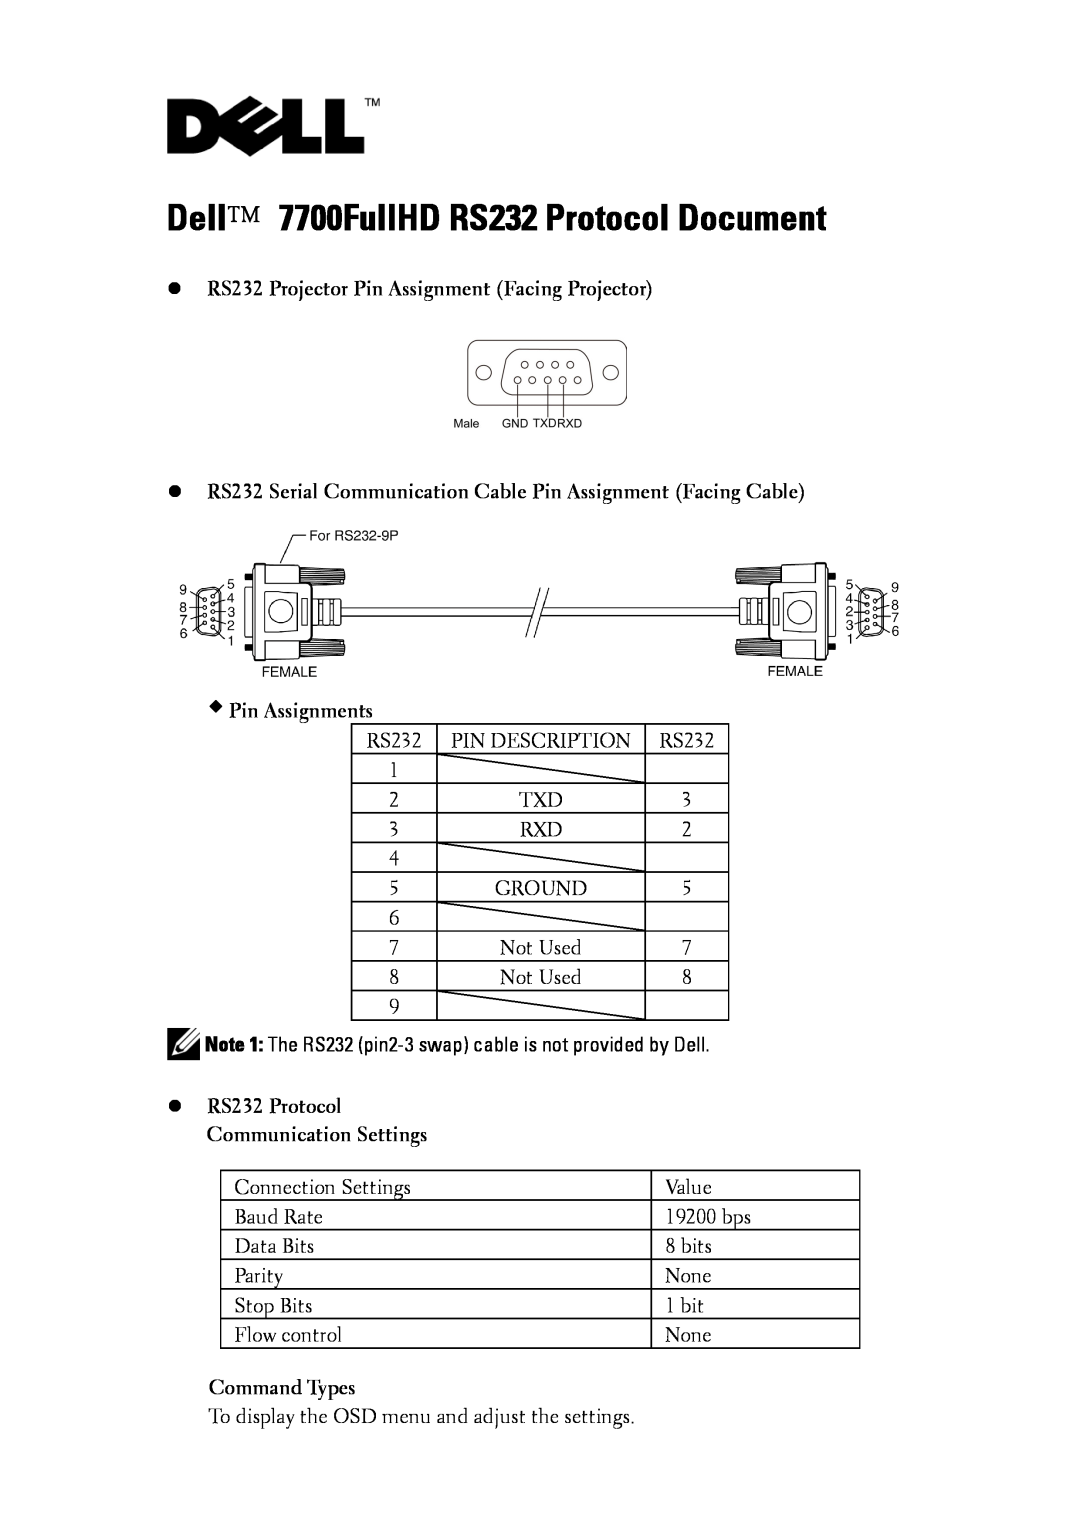 Dell manual z RS232 Projector Pin Assignment Facing Projector, ŠPin Assignments, Command Types 